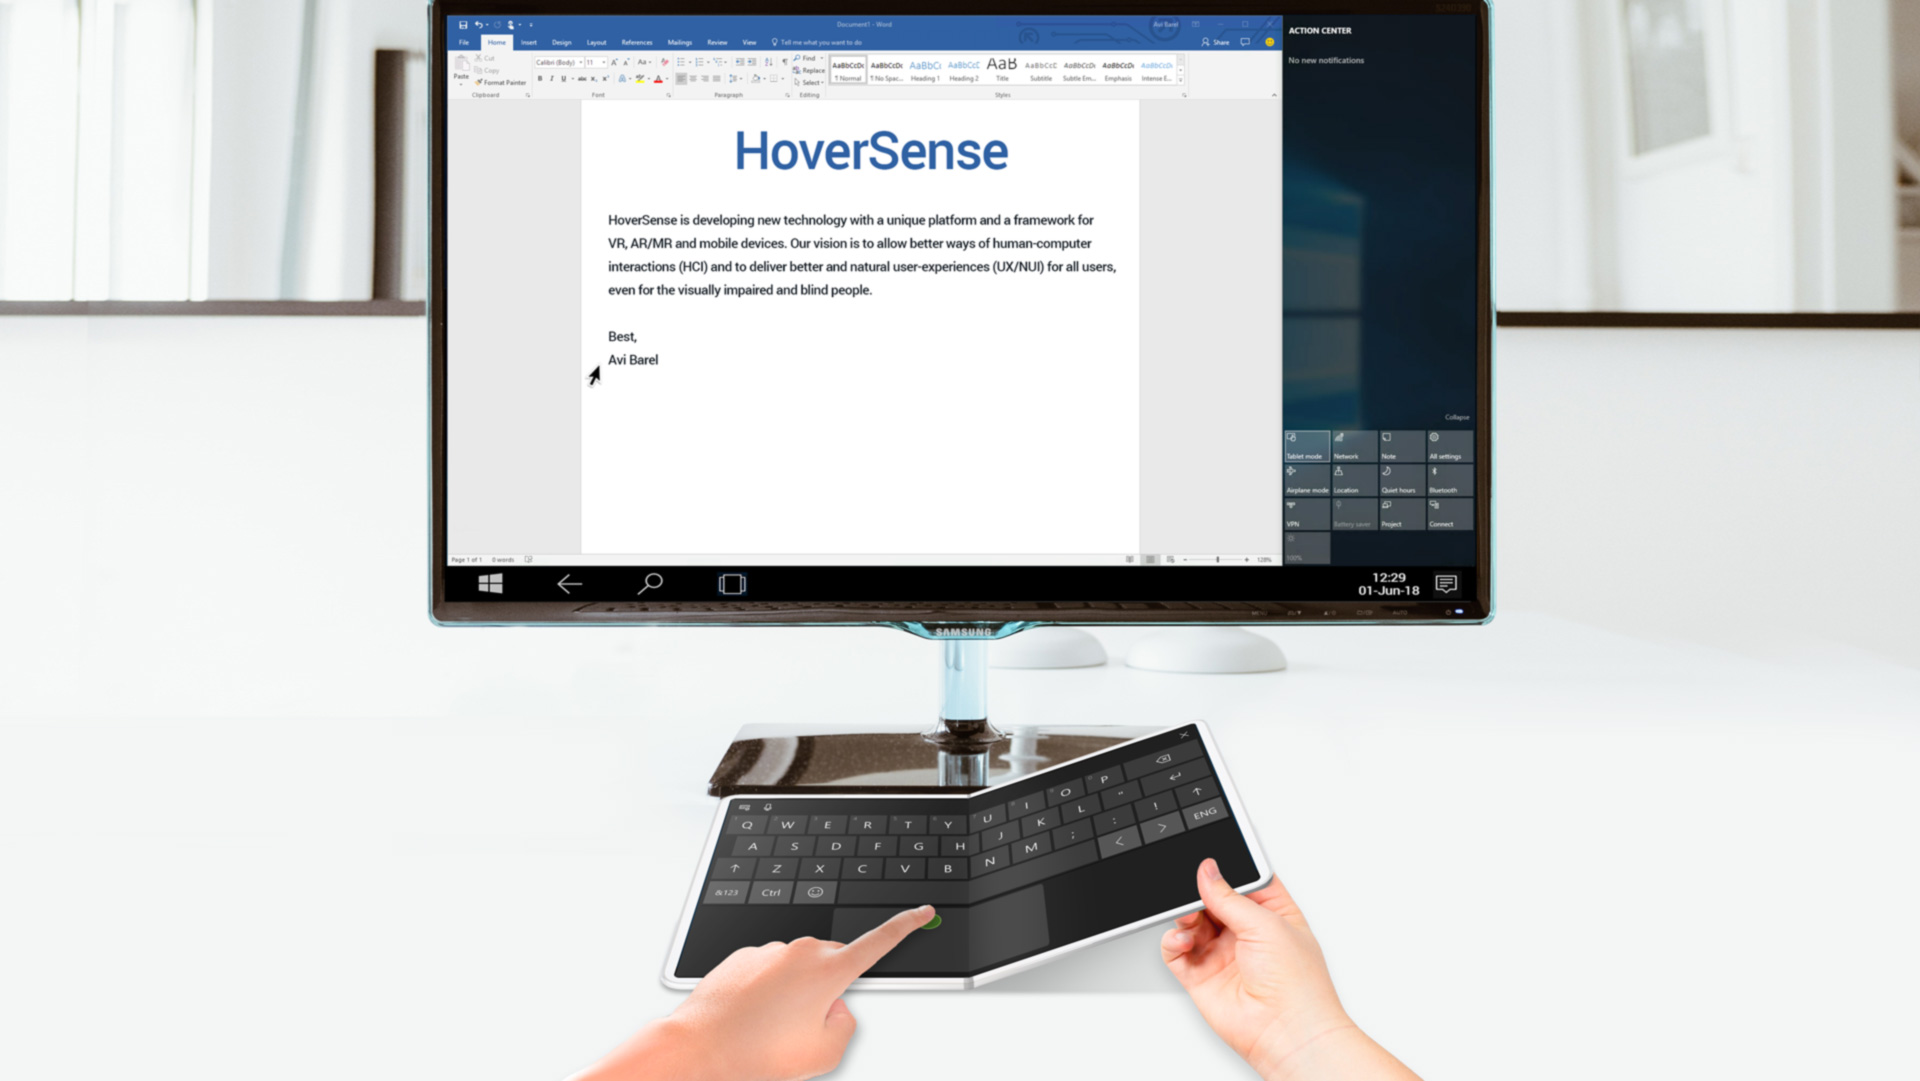 Use your Foldable device as a Tactile keyboard when extending your device's screen to an external display.